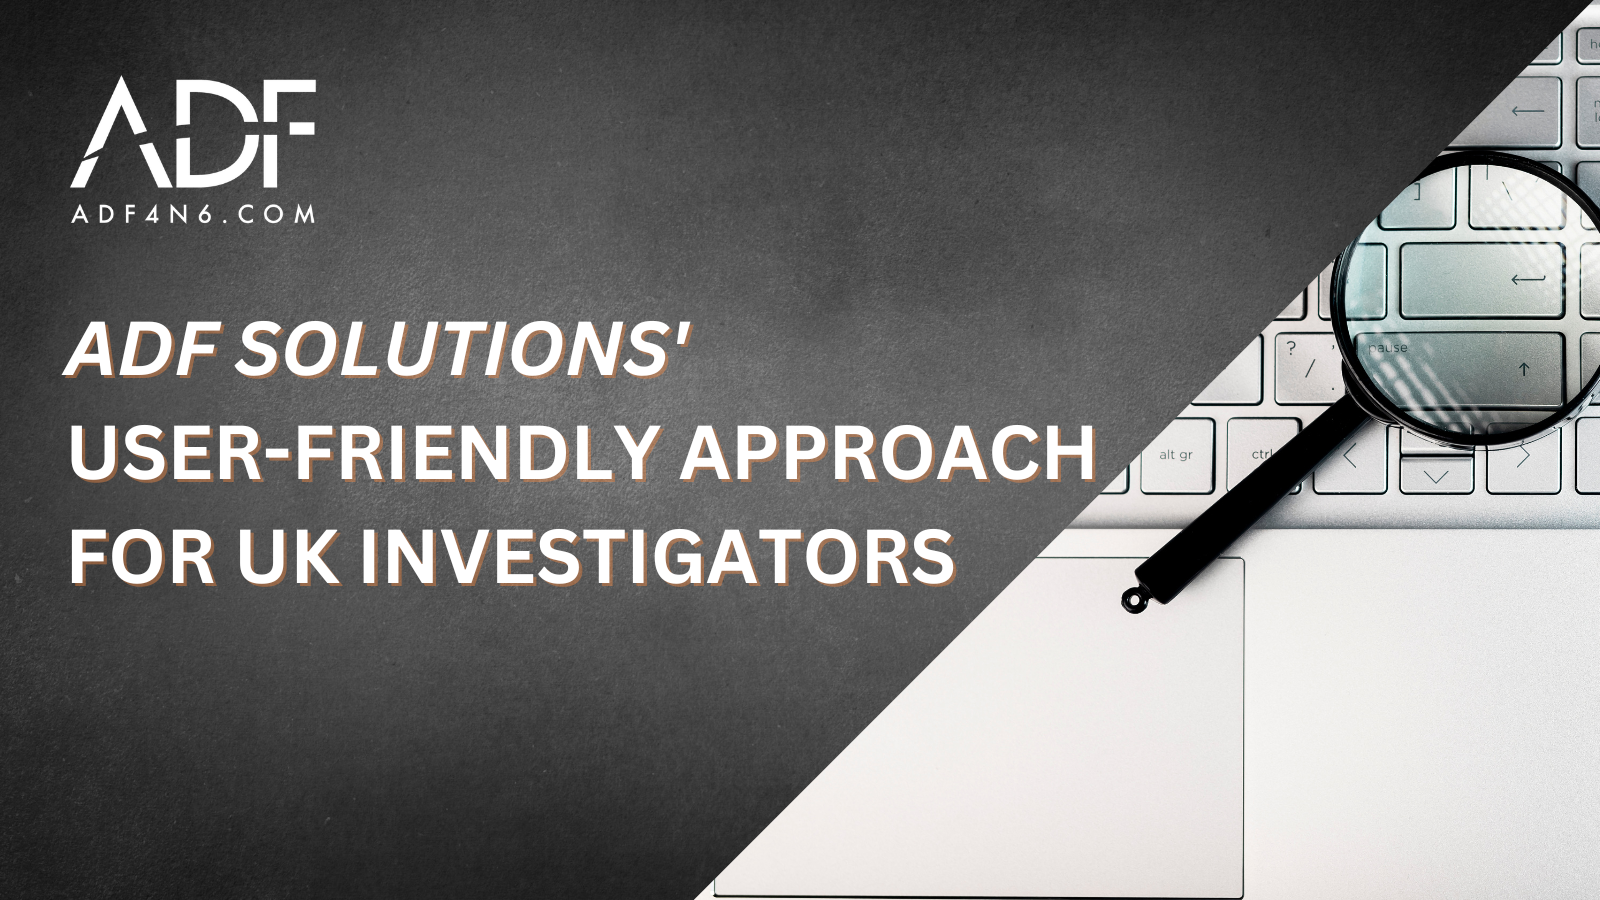 ADF Solutions' User-Friendly Approach for UK Investigators